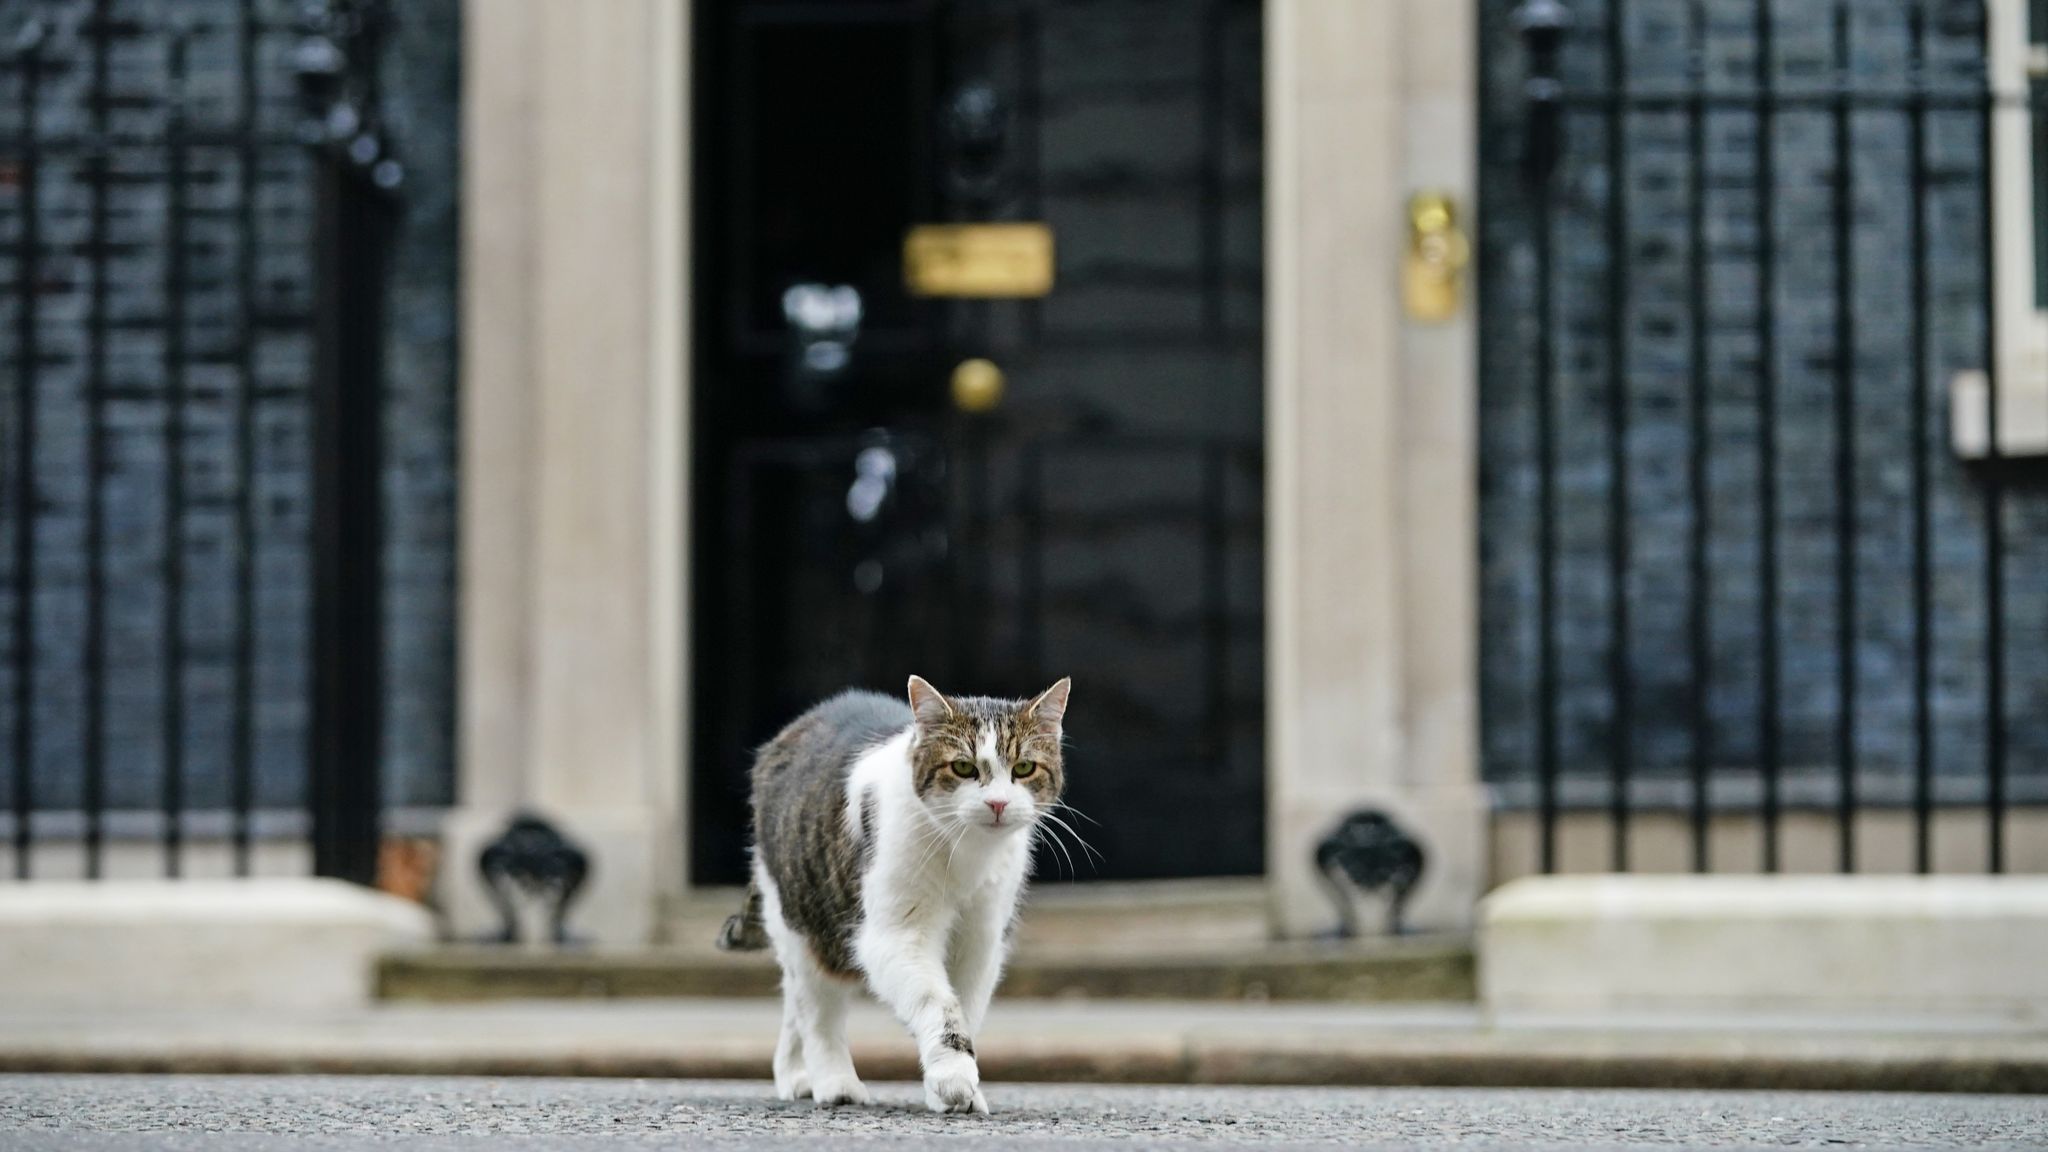 Larry the cat in Downing Street, London, as Prime Minister Boris Johnson reshuffles his Cabinet. Picture date: Tuesday February 8, 2022. 